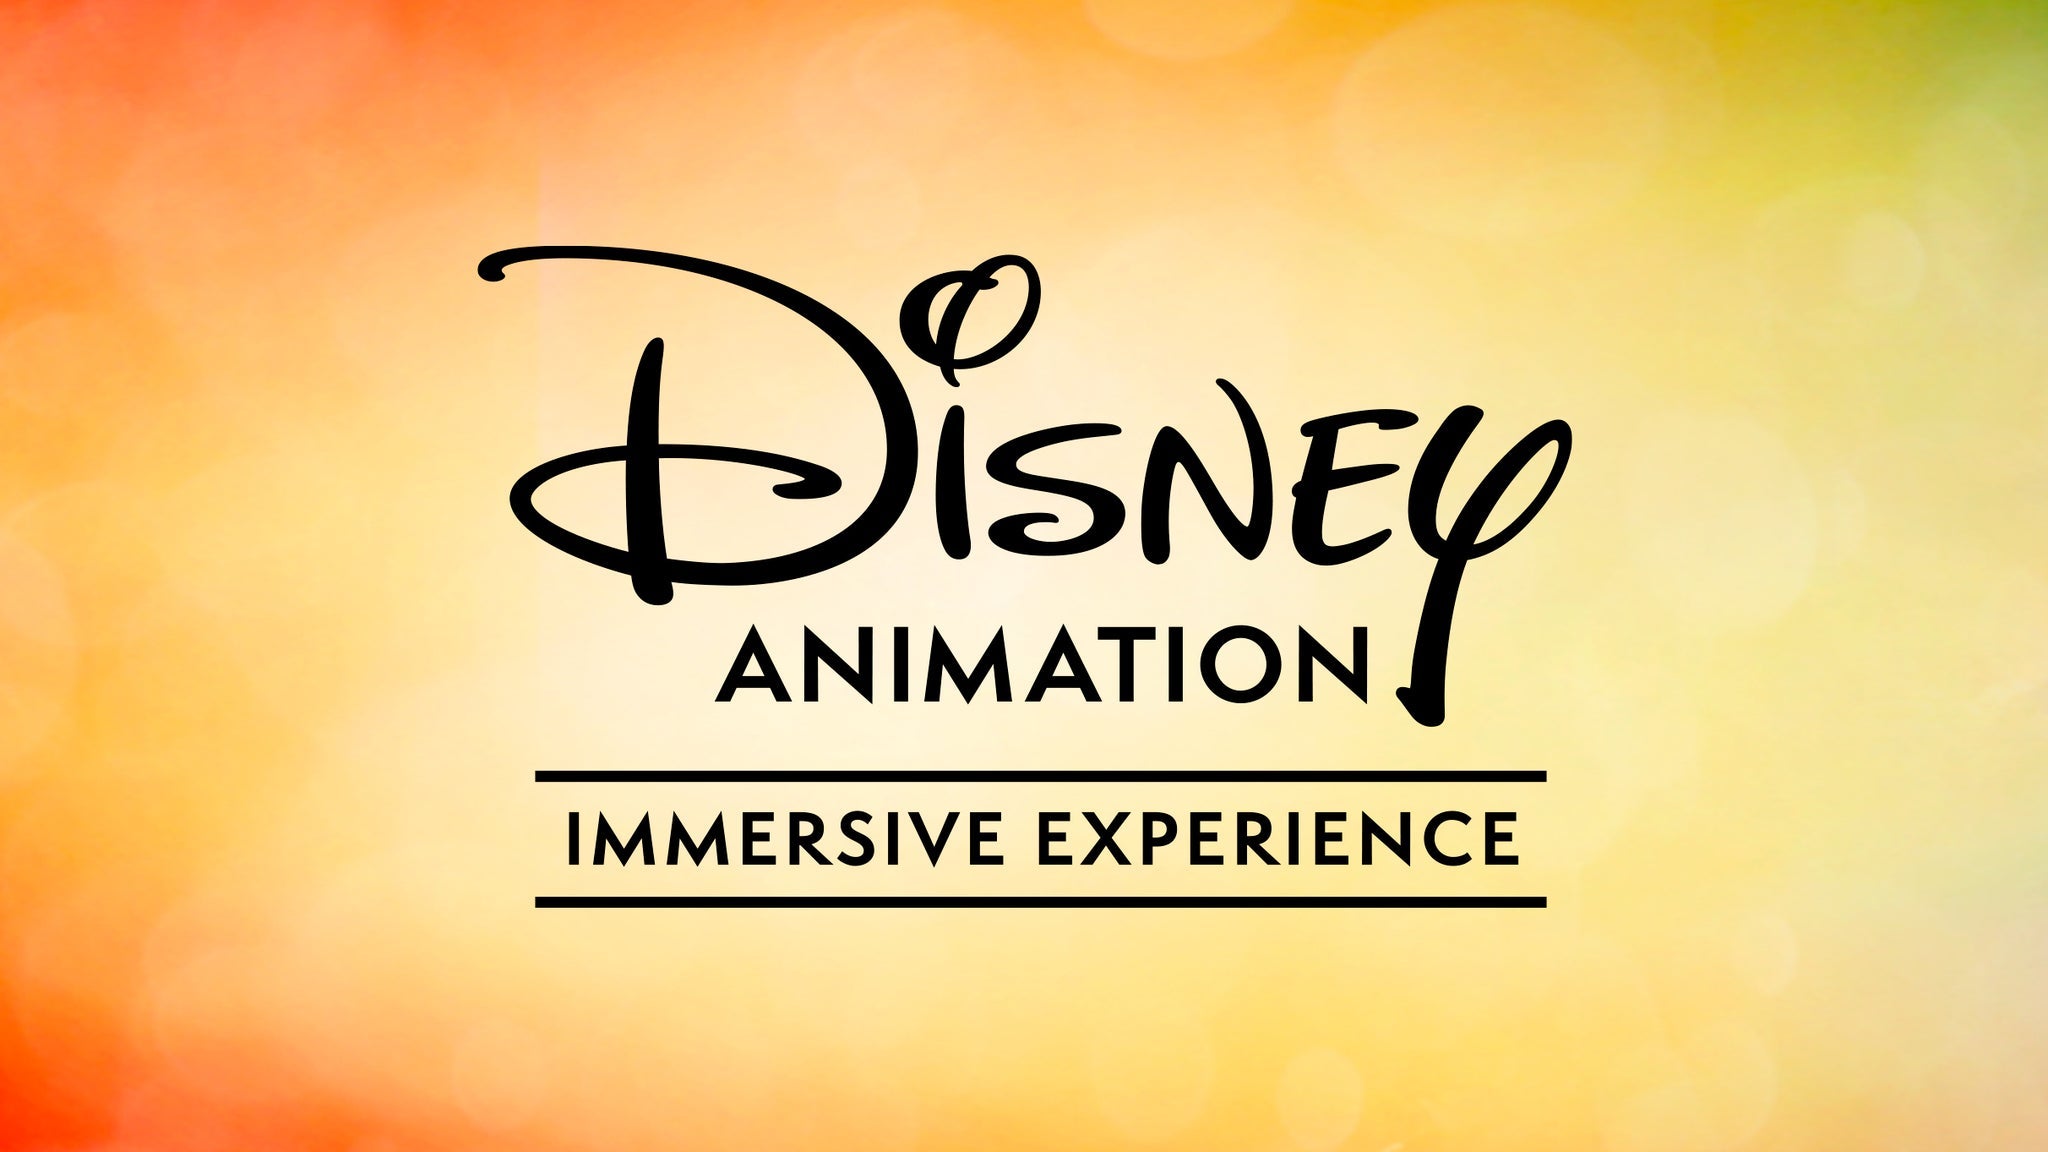 Cleveland - Disney Animation: Immersive Experience